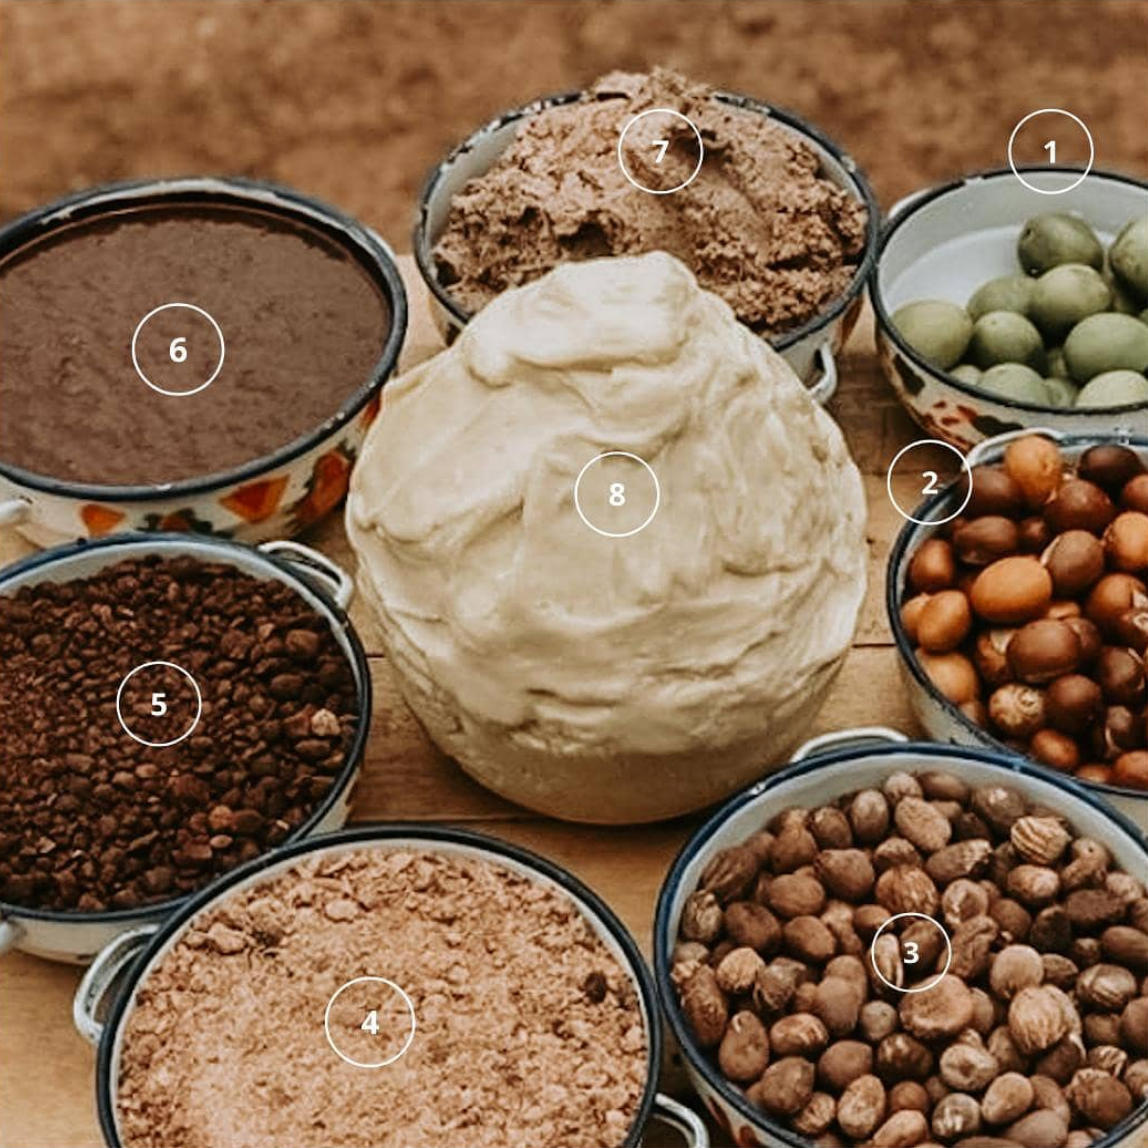 From the Fruit to the Nut to the Butter: The Shea Process